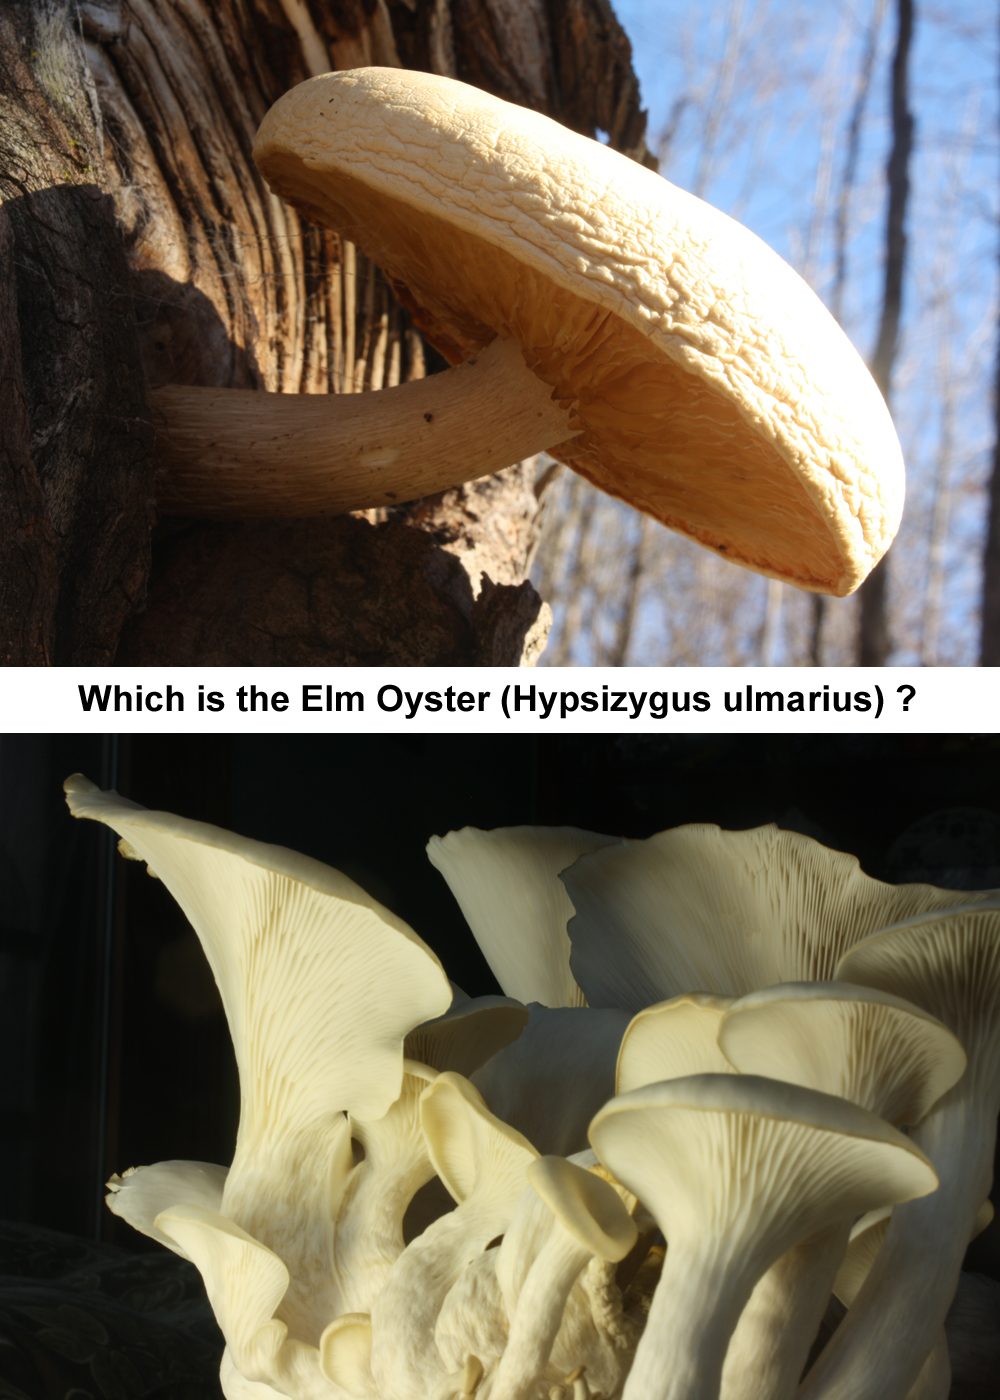 Which is the Elm Oyster (Hypsizygus ulmarius) - A search of the internet for “Hypsizygus ulmarius” turns up about a 50/50 split between pictures of the two distinct species. The divide is pretty clearly between growers and field mycologists.